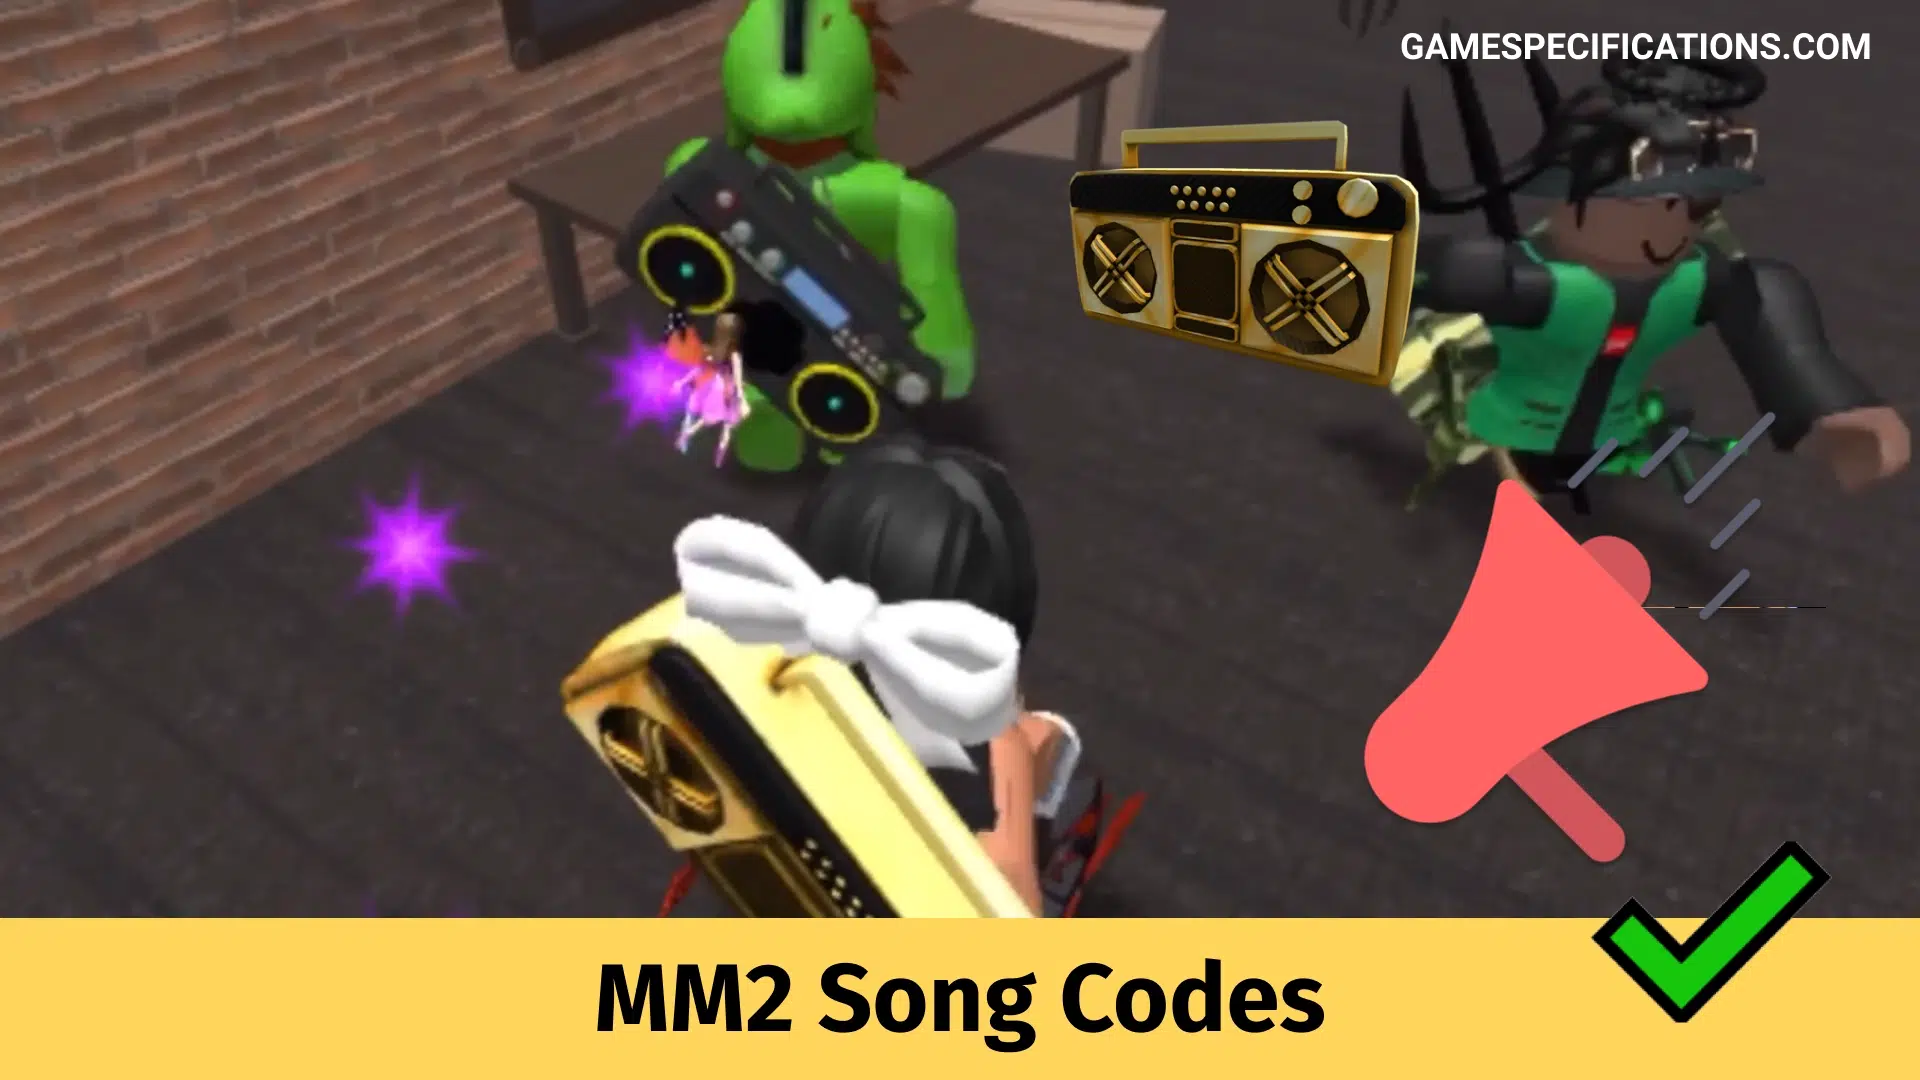 MM2 Song Codes To Play Awesome Music - Game Specifications